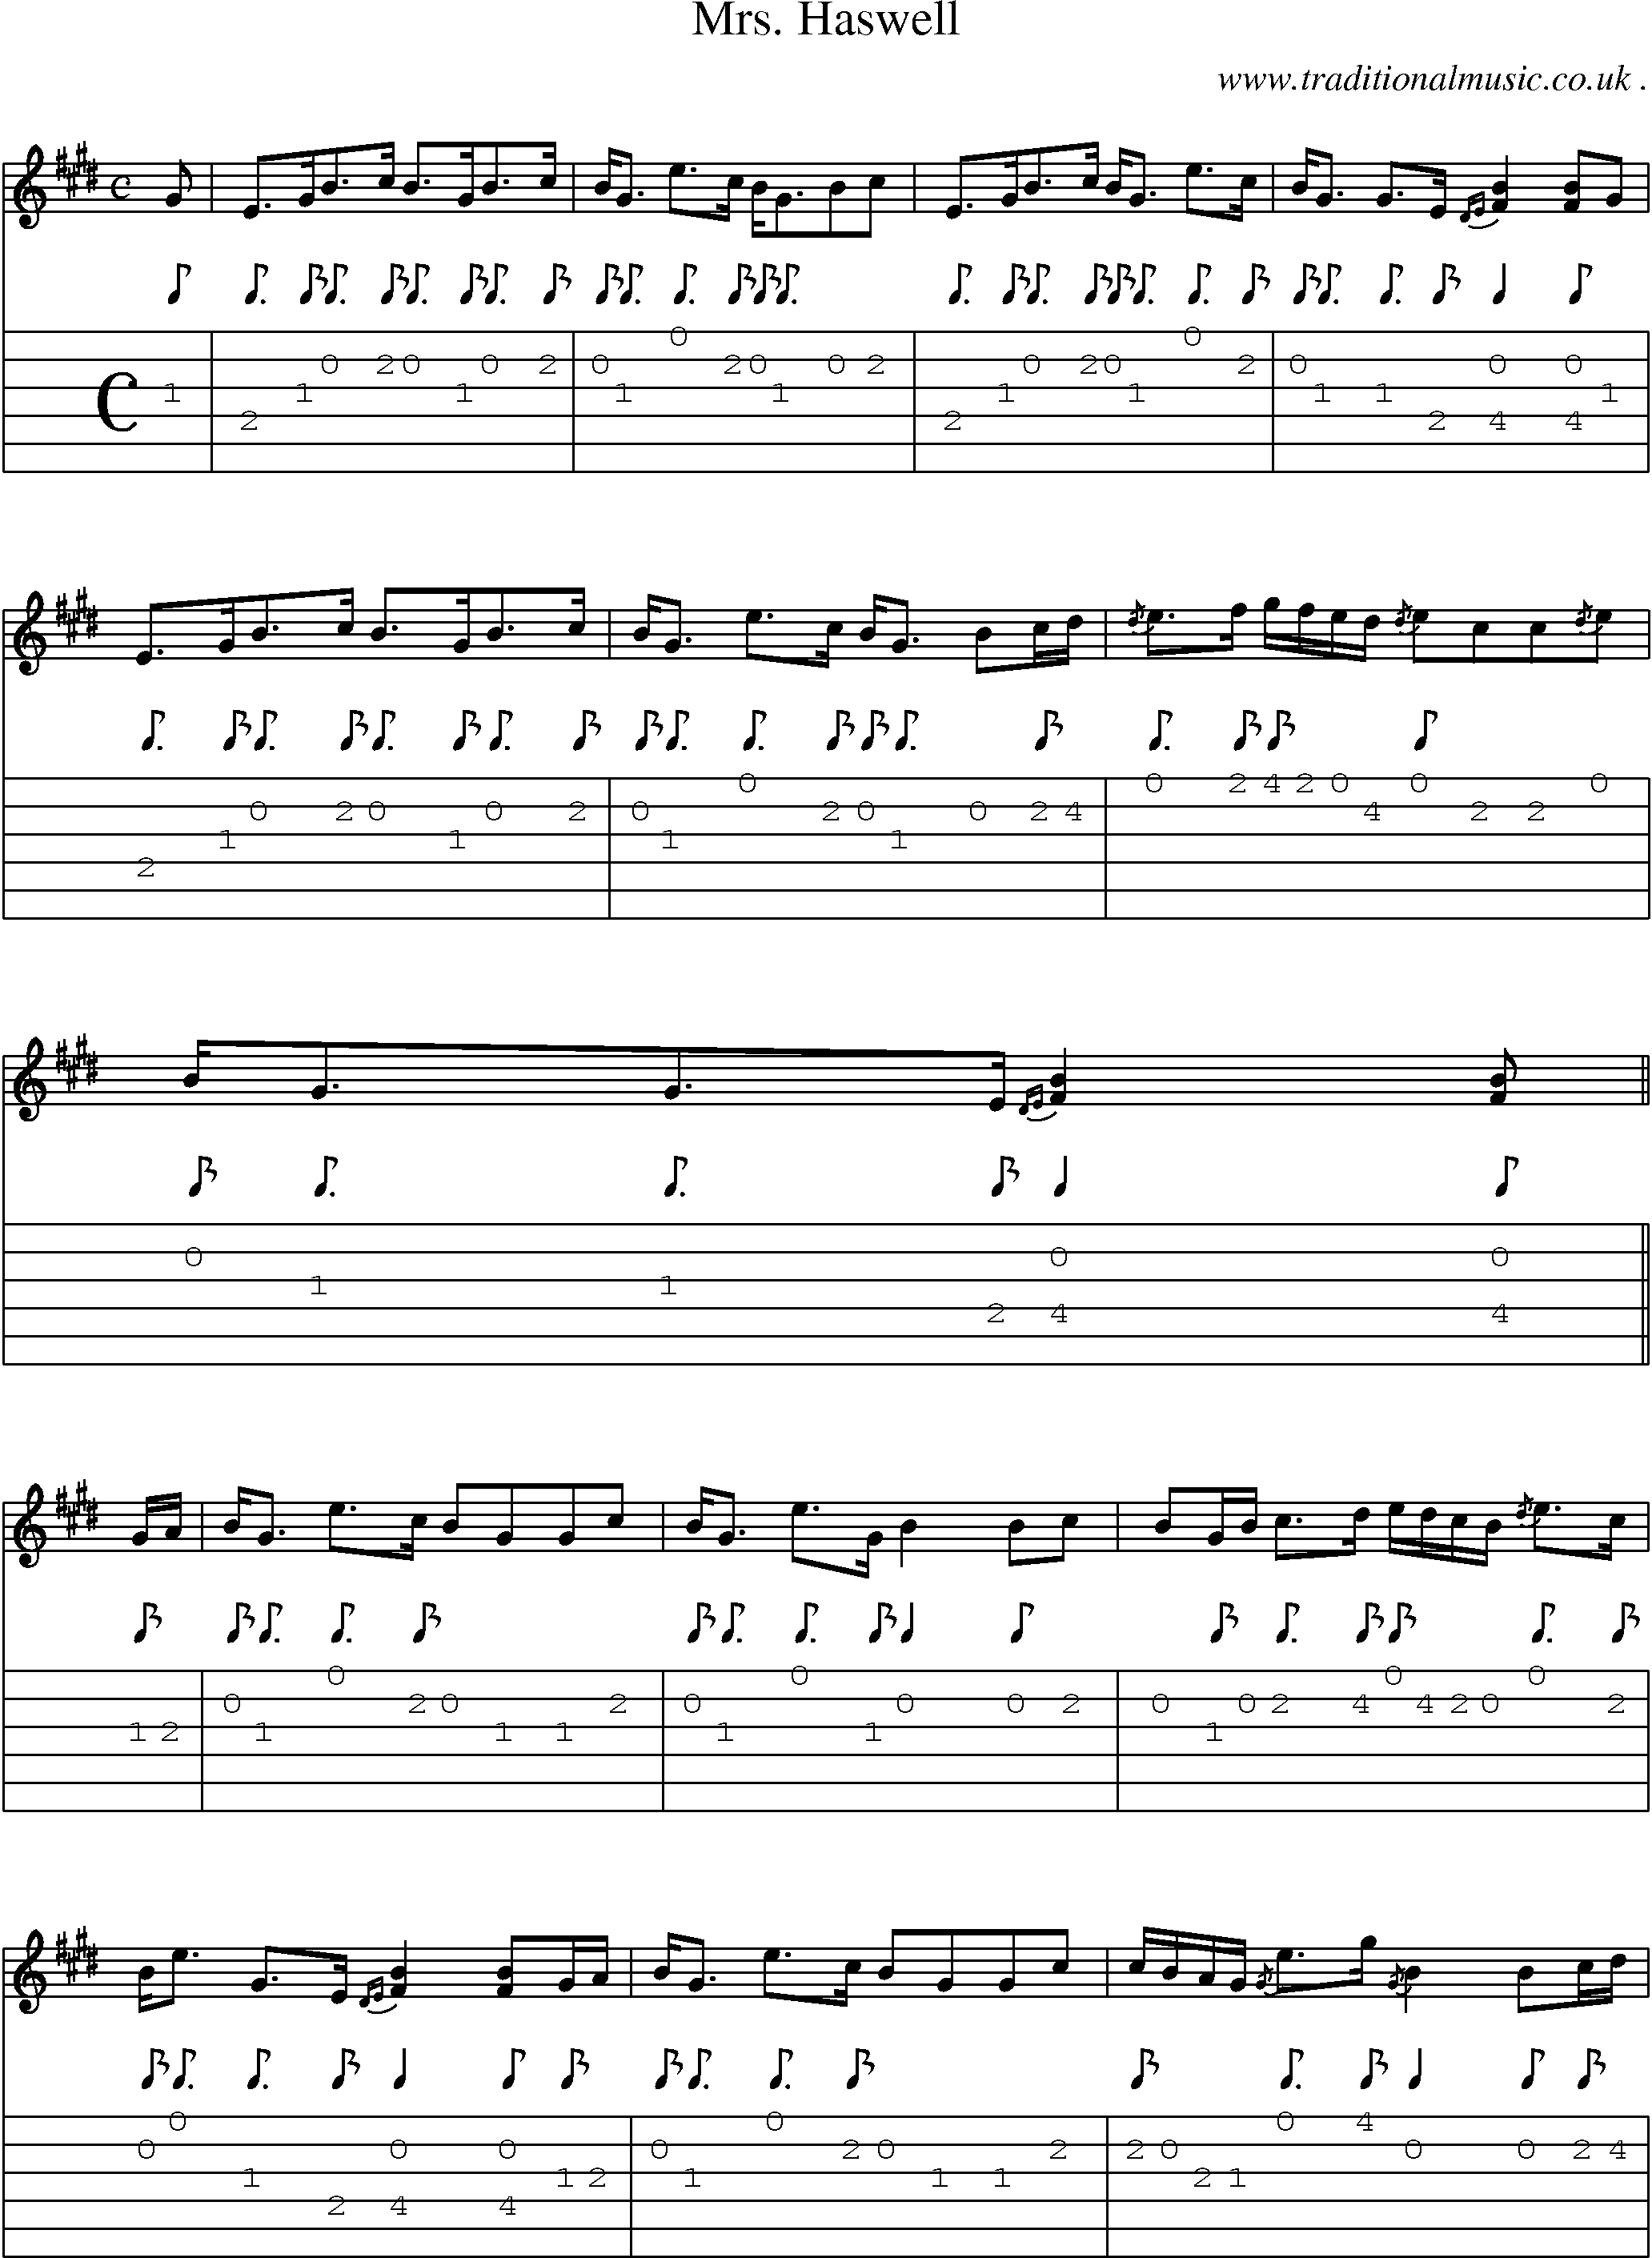 Sheet-music  score, Chords and Guitar Tabs for Mrs Haswell